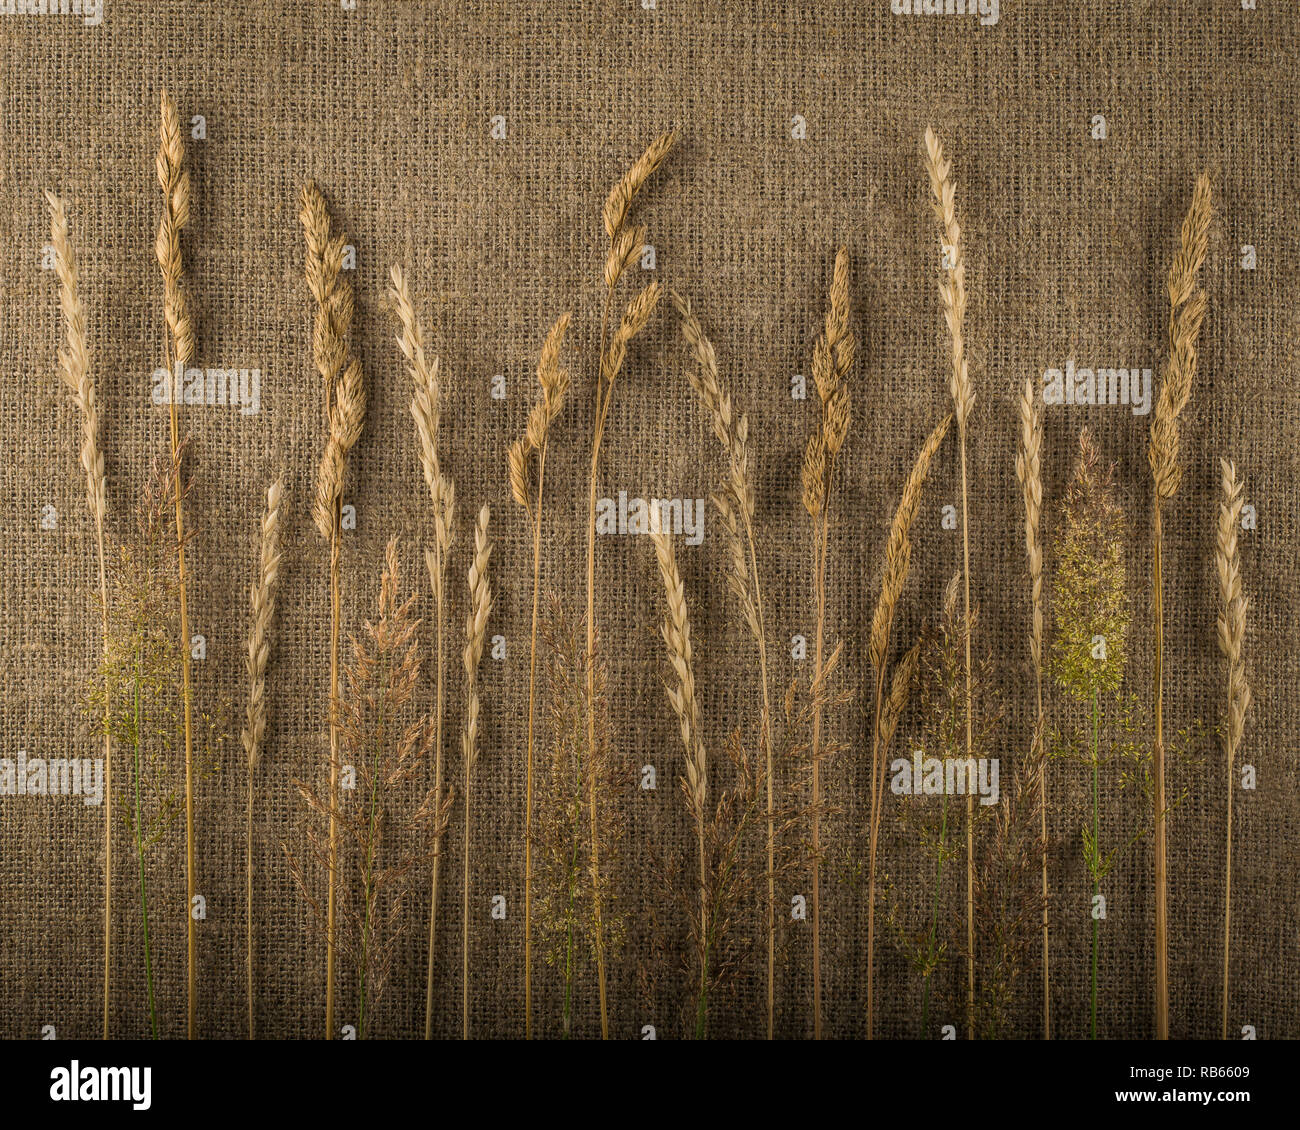 Composition of cut dried grass on linen background Stock Photo